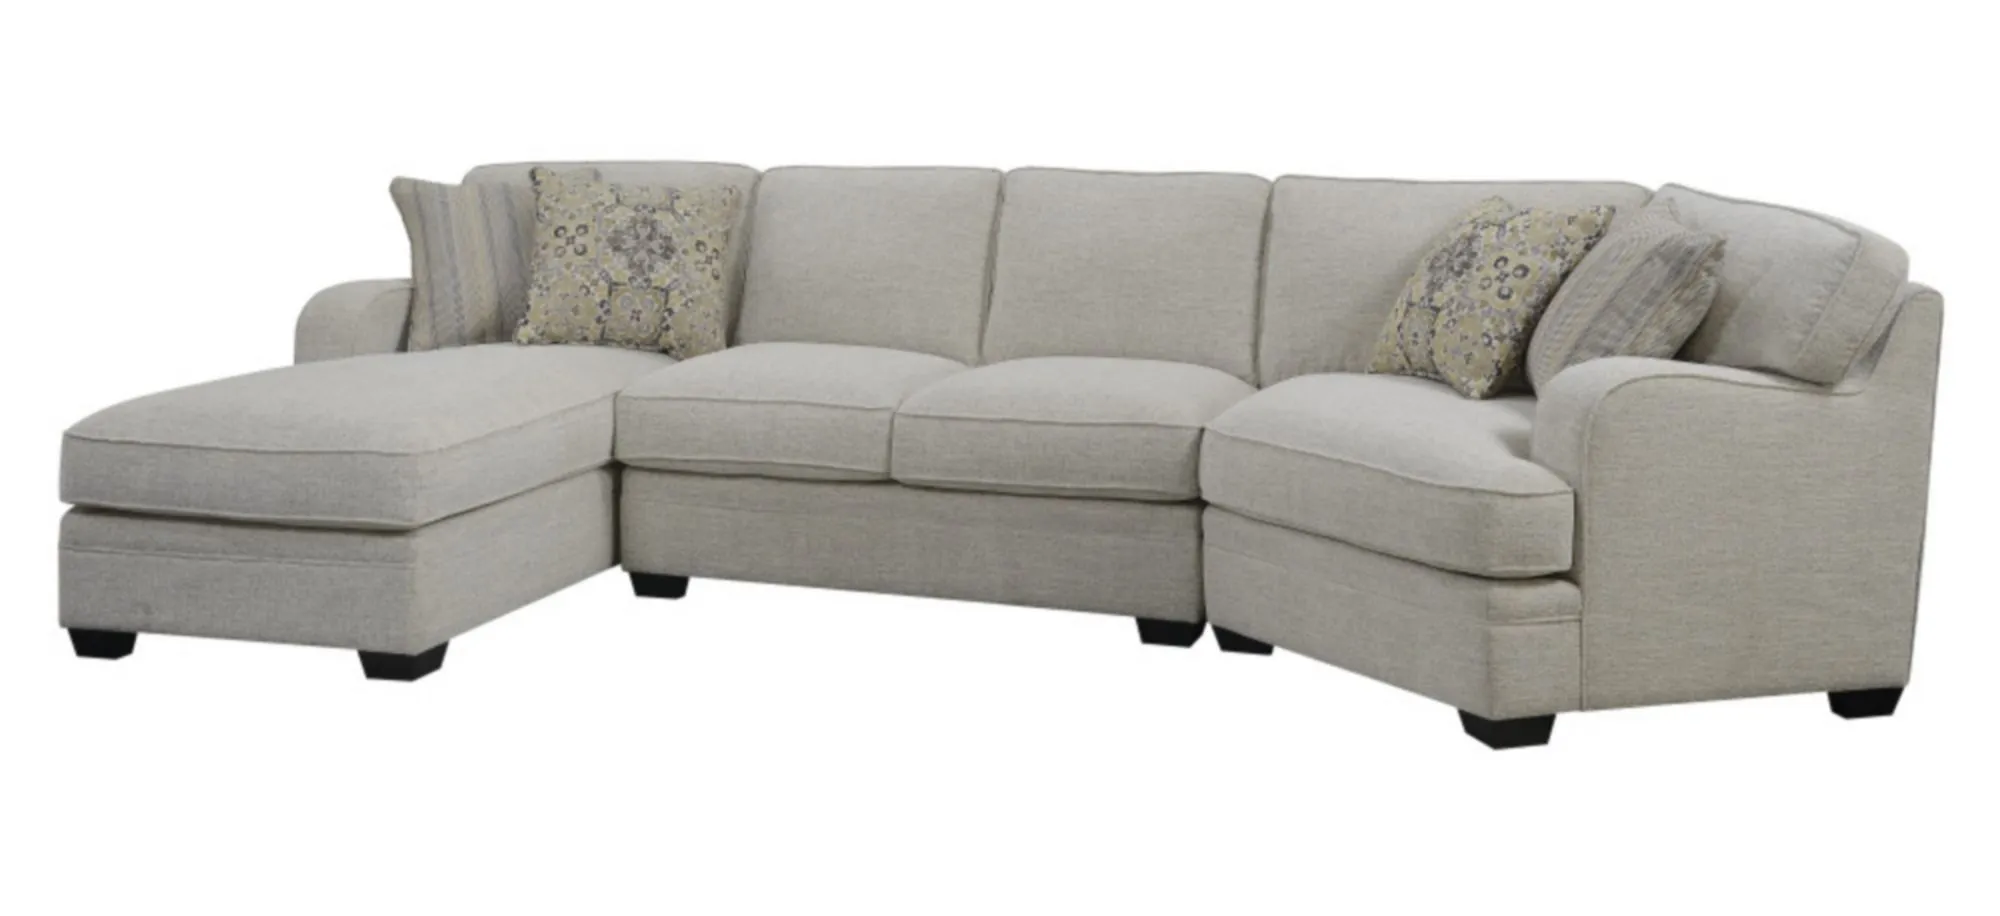 Analiese Sectional Sofa in Ivory by Emerald Home Furnishings